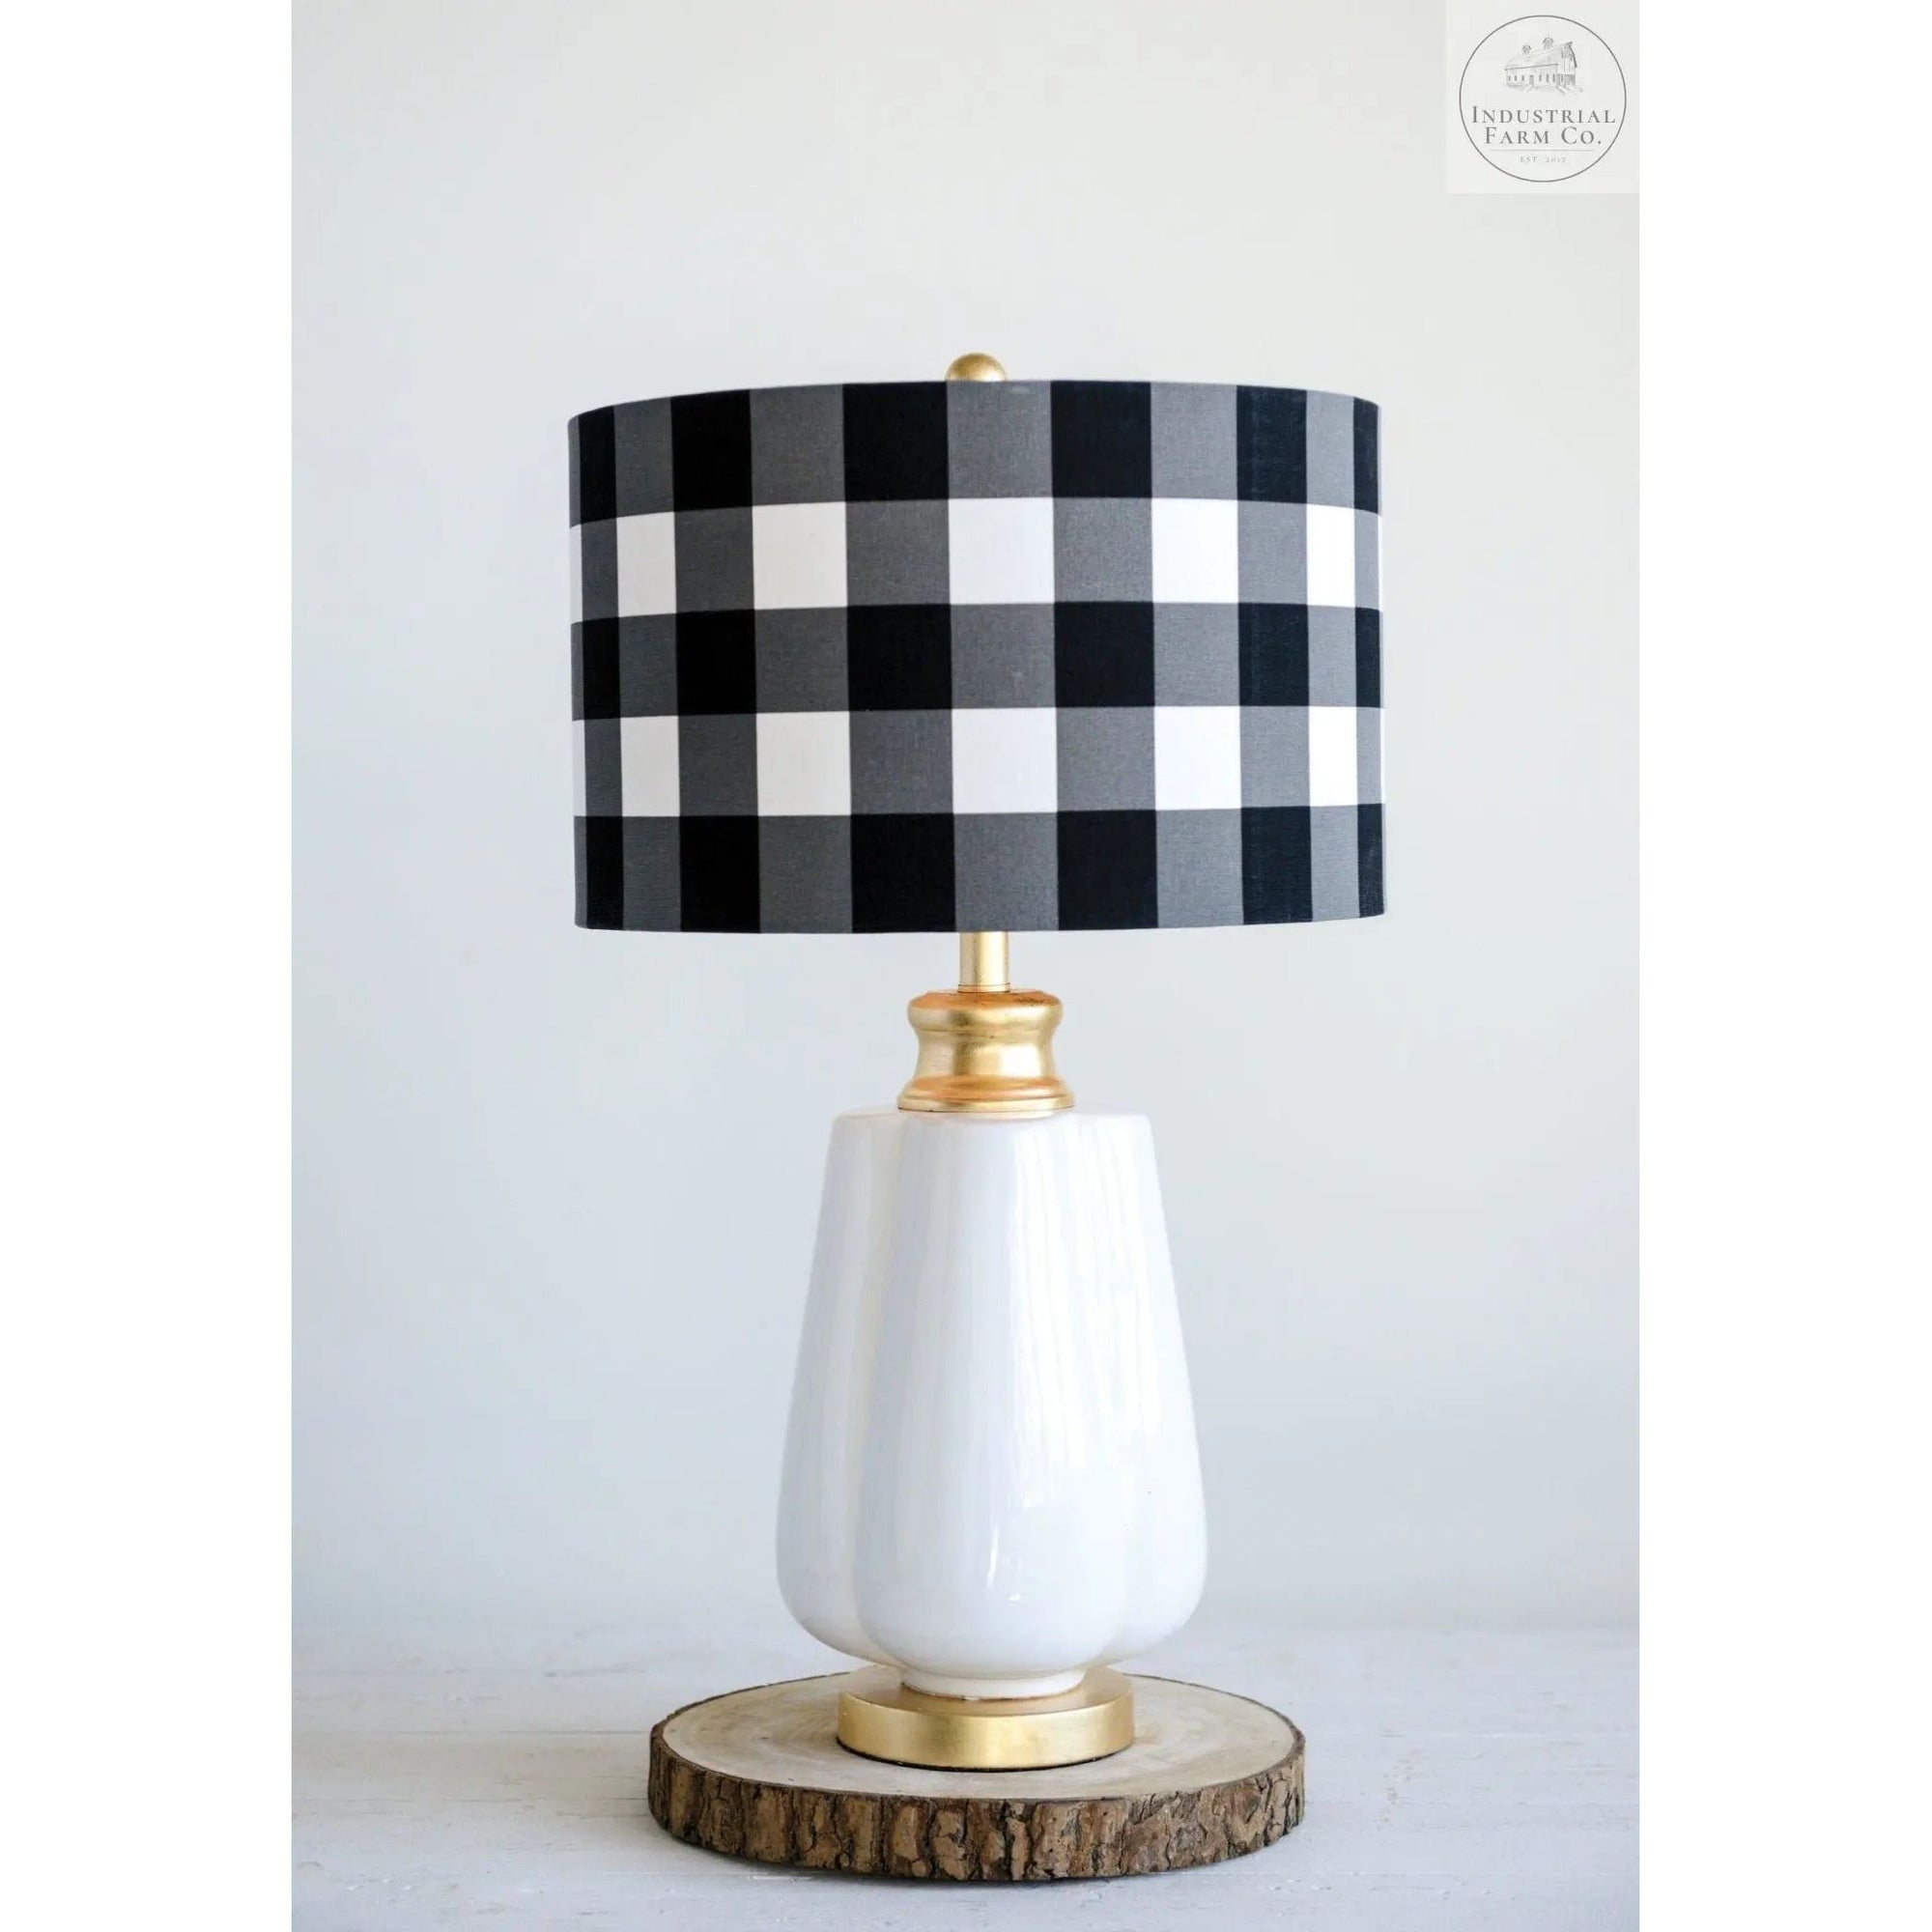 The Carrie Style Table Lamp     | Industrial Farm Co